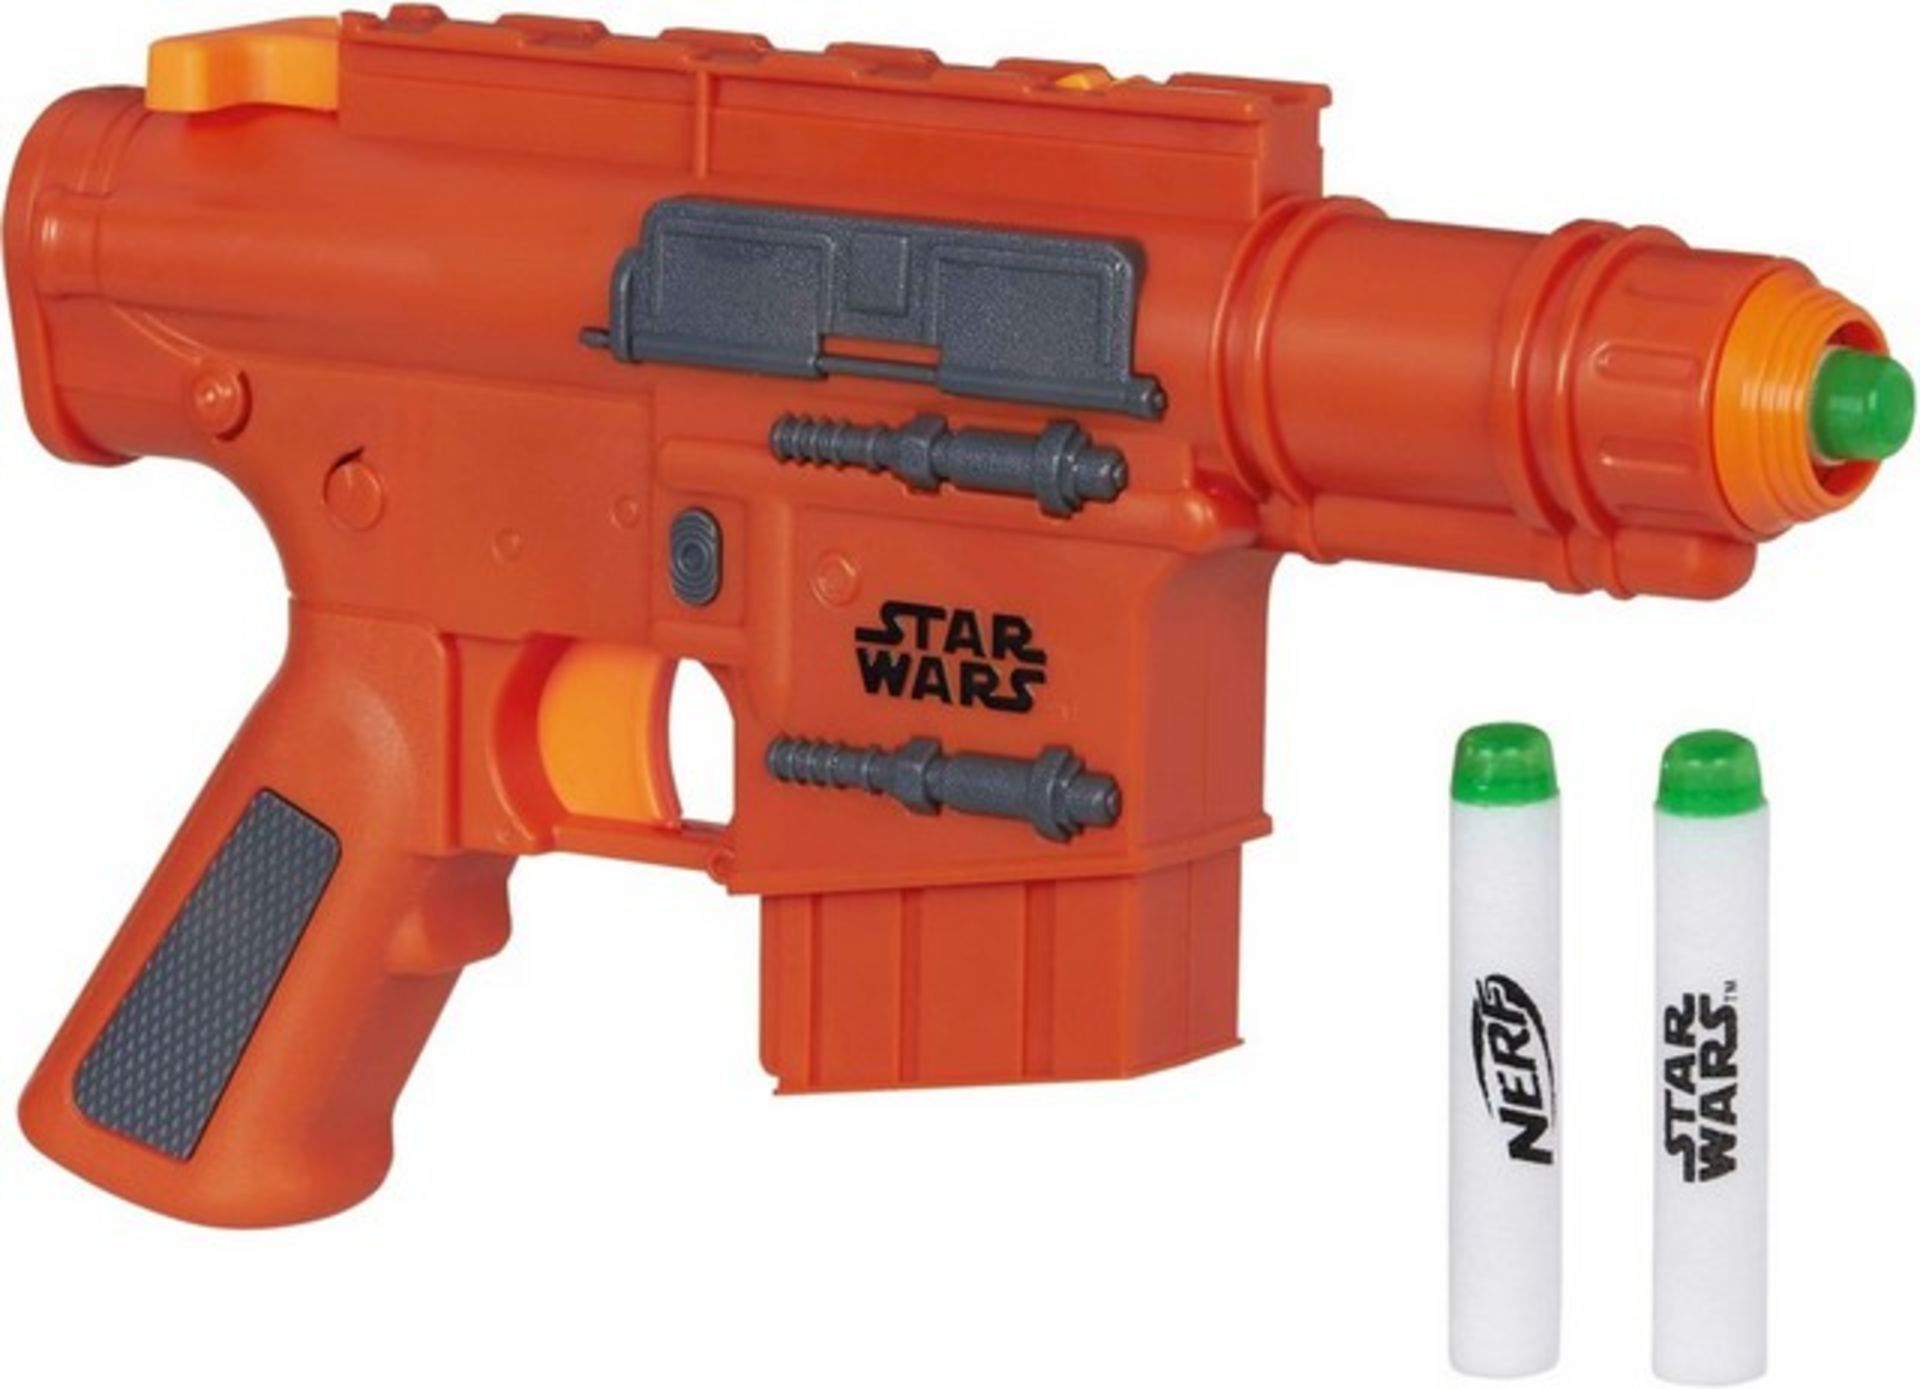 V Brand New Star Wars Rogue One Captain Cassian Andor Nerf Gun (Blaster Pistol) With 3 Glowing Darts - Image 2 of 2